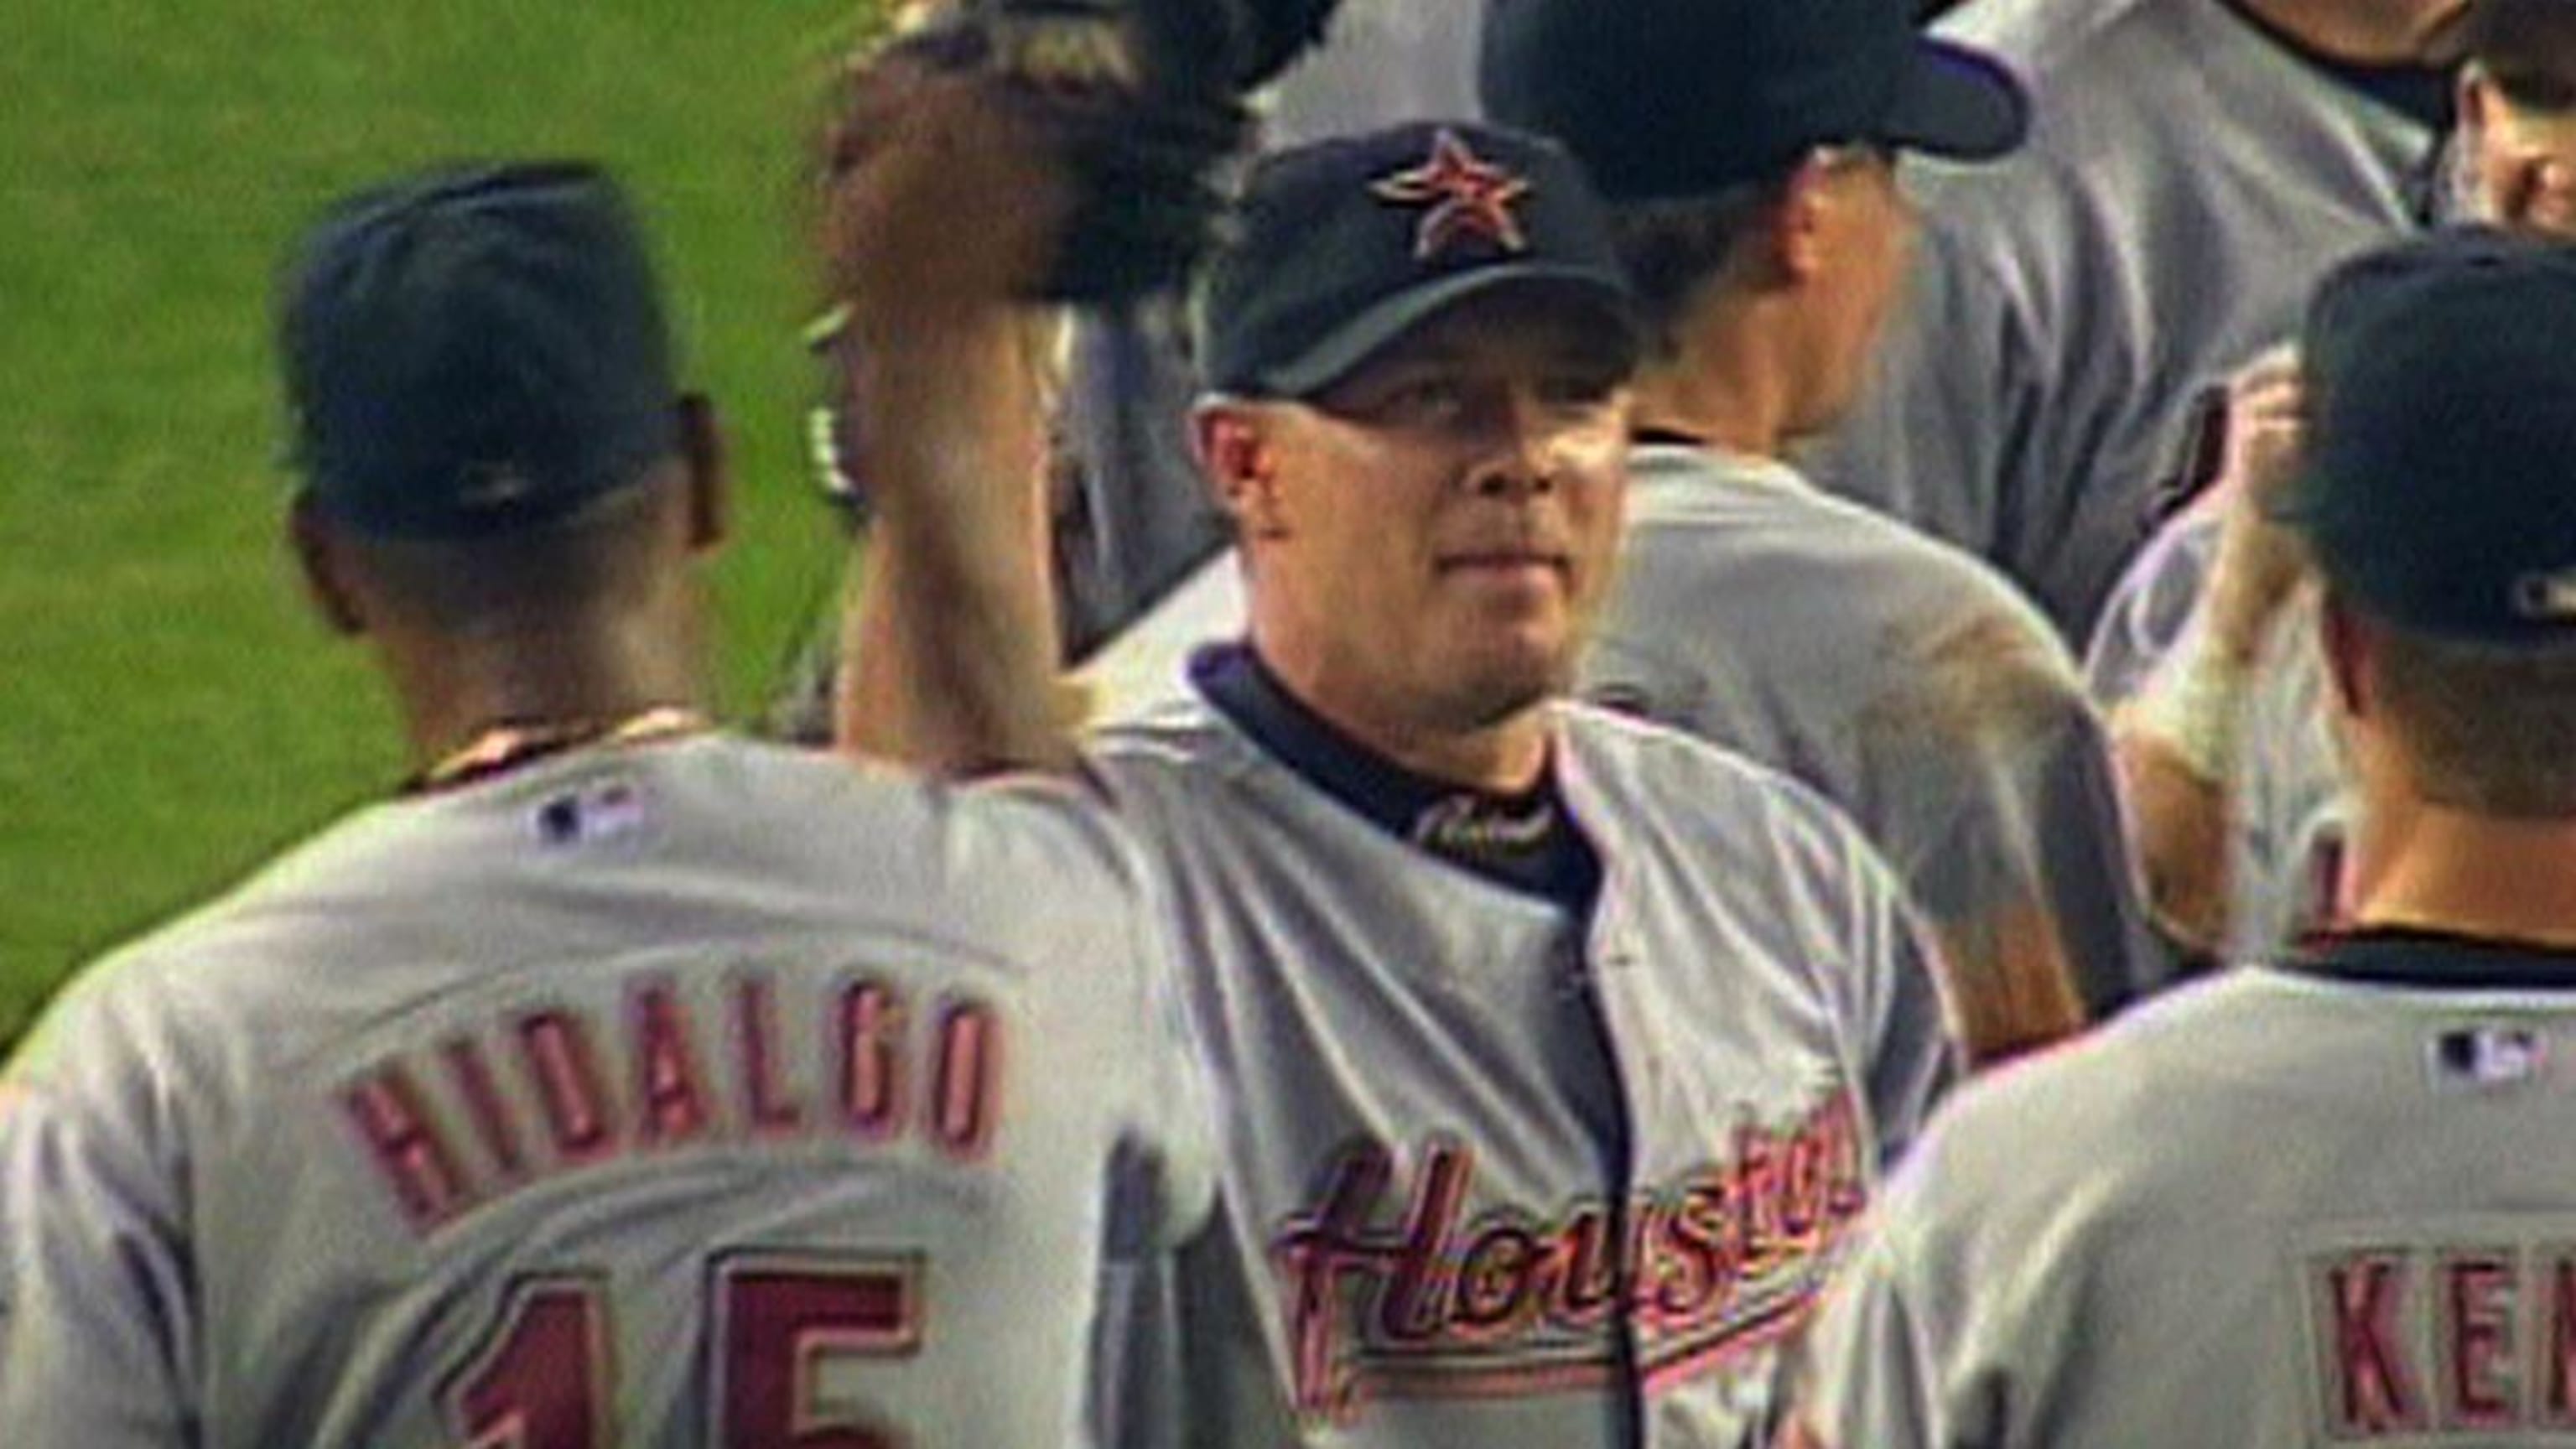 billy wagner hall of fame